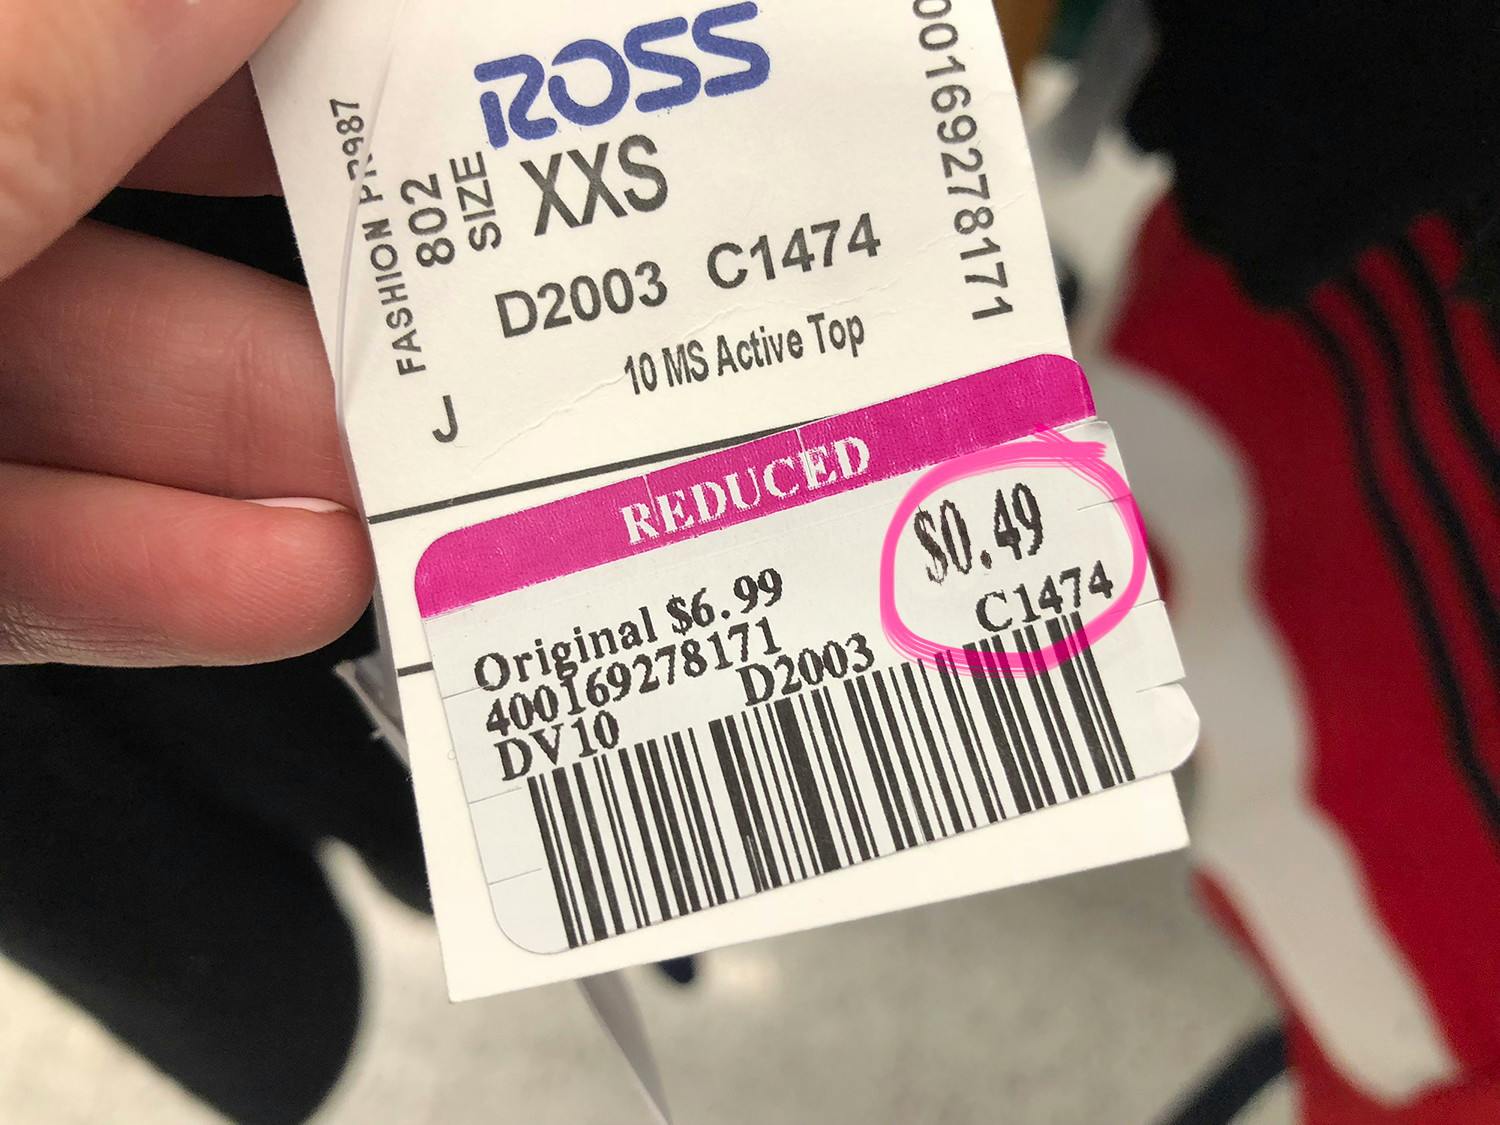 Ross Clearance Sale What You'll Find For 0.49 The Krazy Coupon Lady